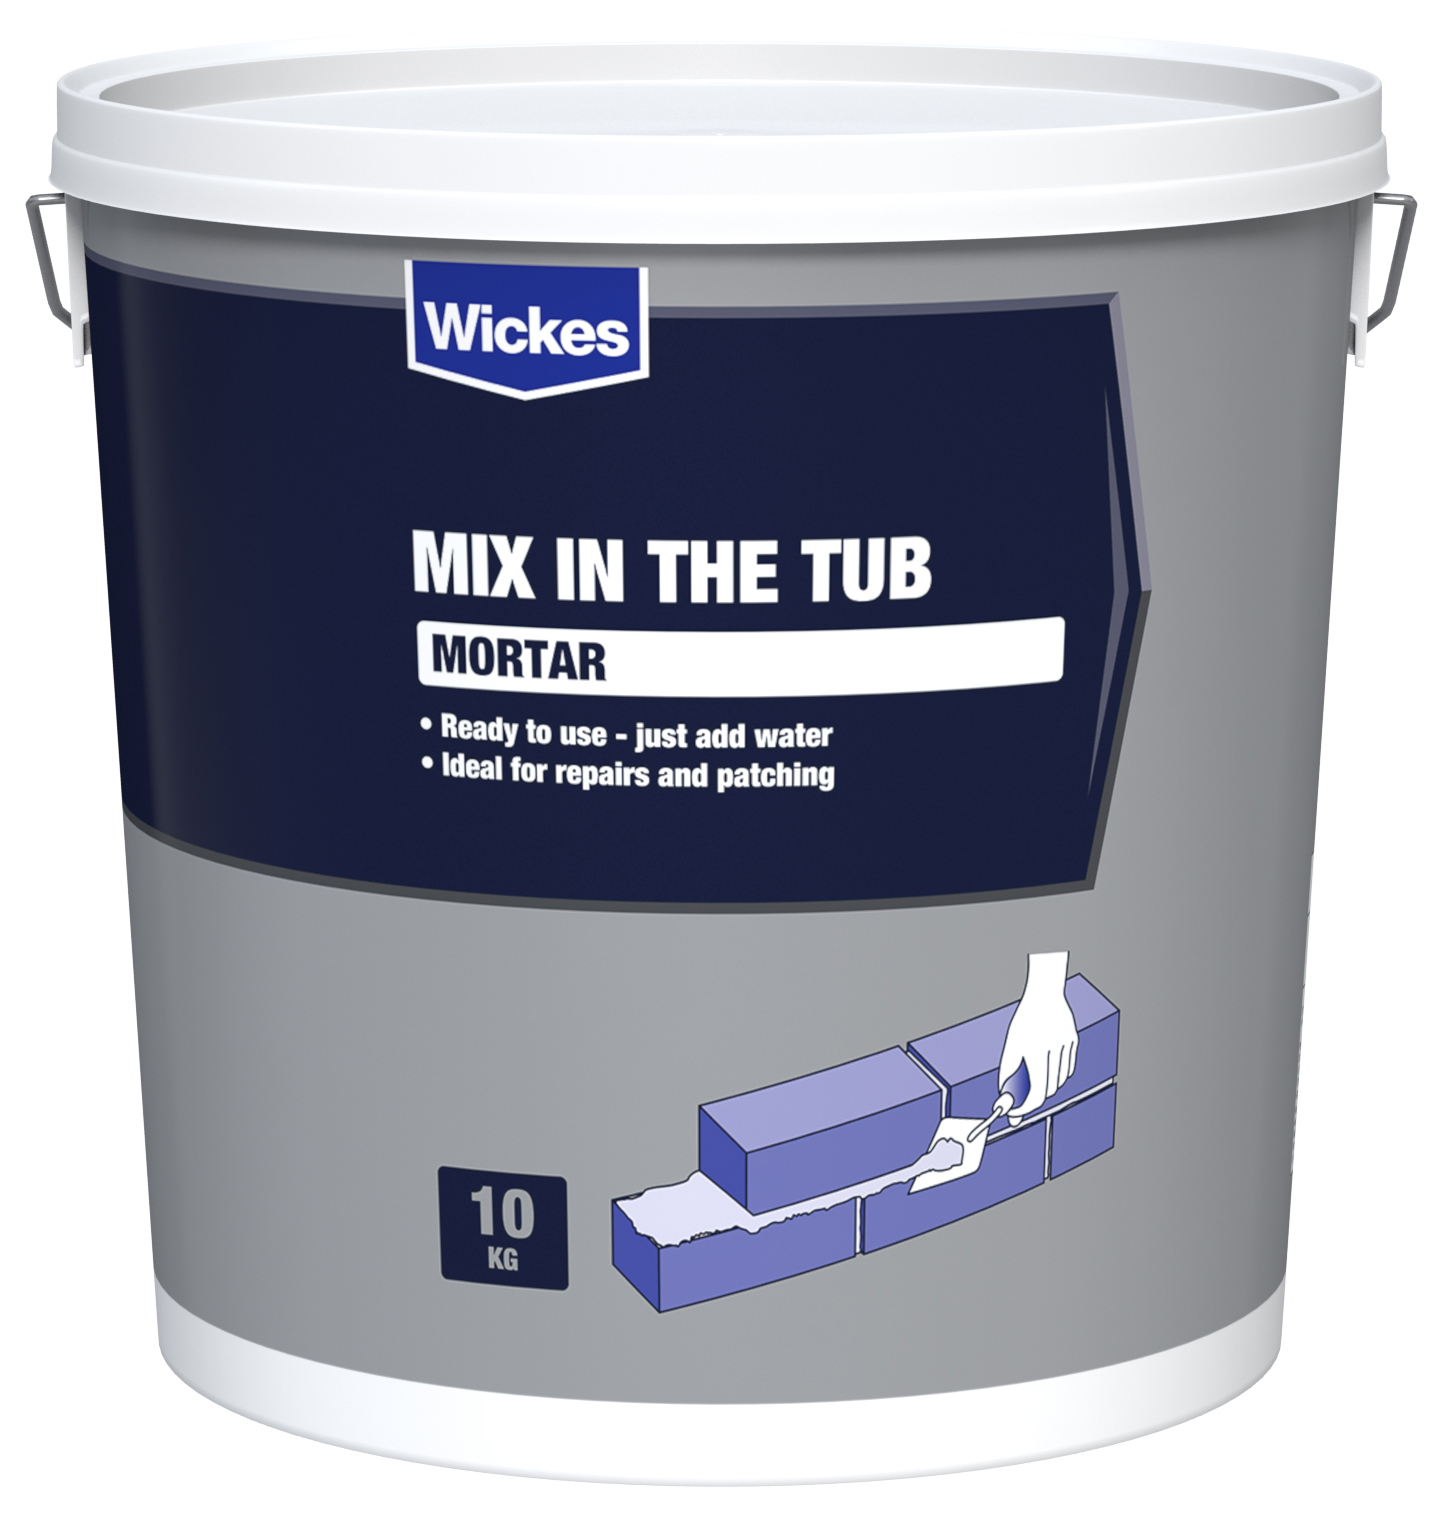 Wickes Mix in the Tub Mortar - 10kg